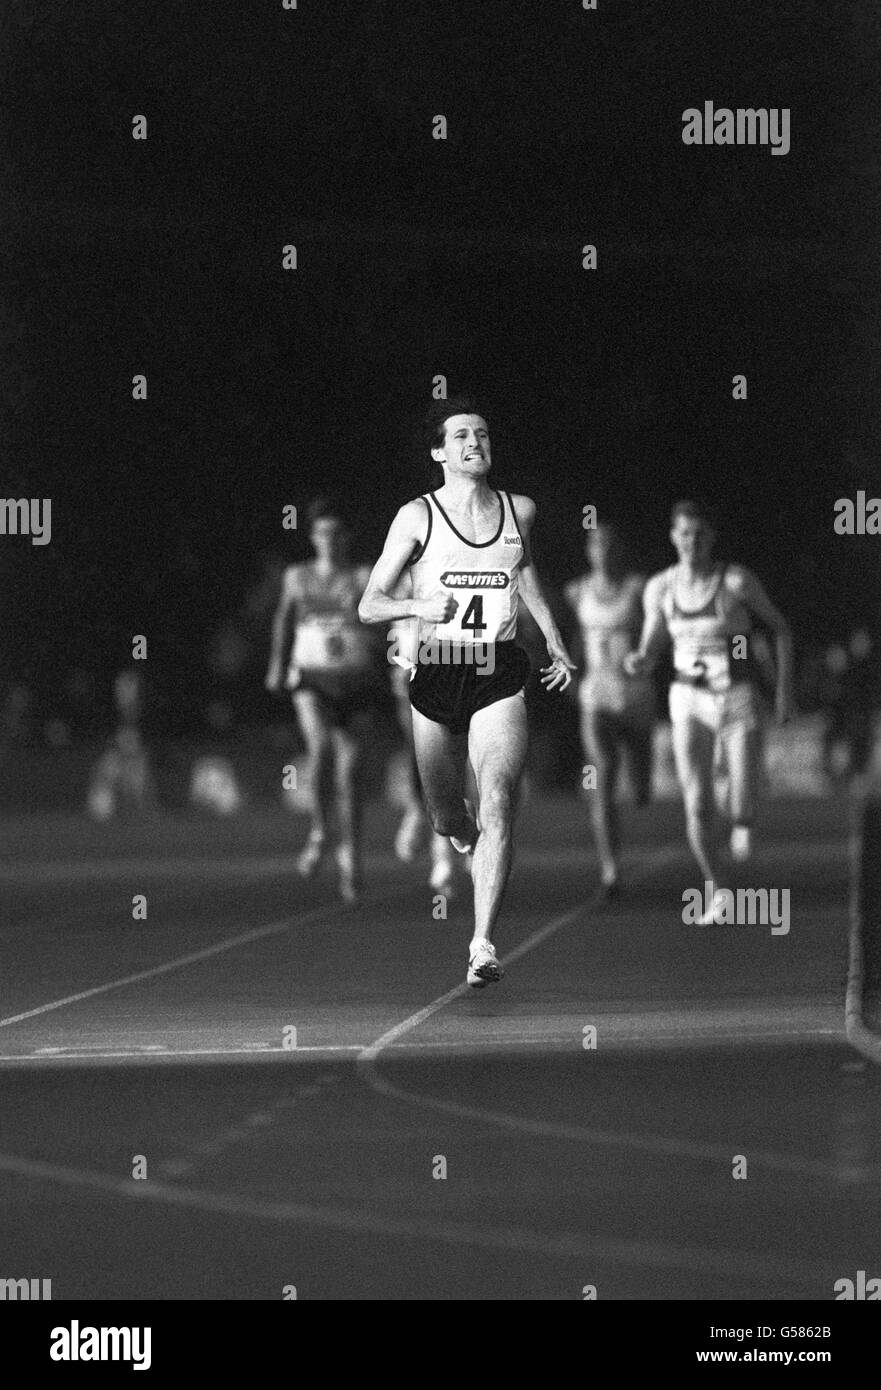 Athletics - McVitie's Invitation Challenge - Men's 800 metres - Crystal Palace, London. The strain shows on the face of Sebastian Coe on his way to winning the 800 metres in 1 minute 44.28 secs. Stock Photo